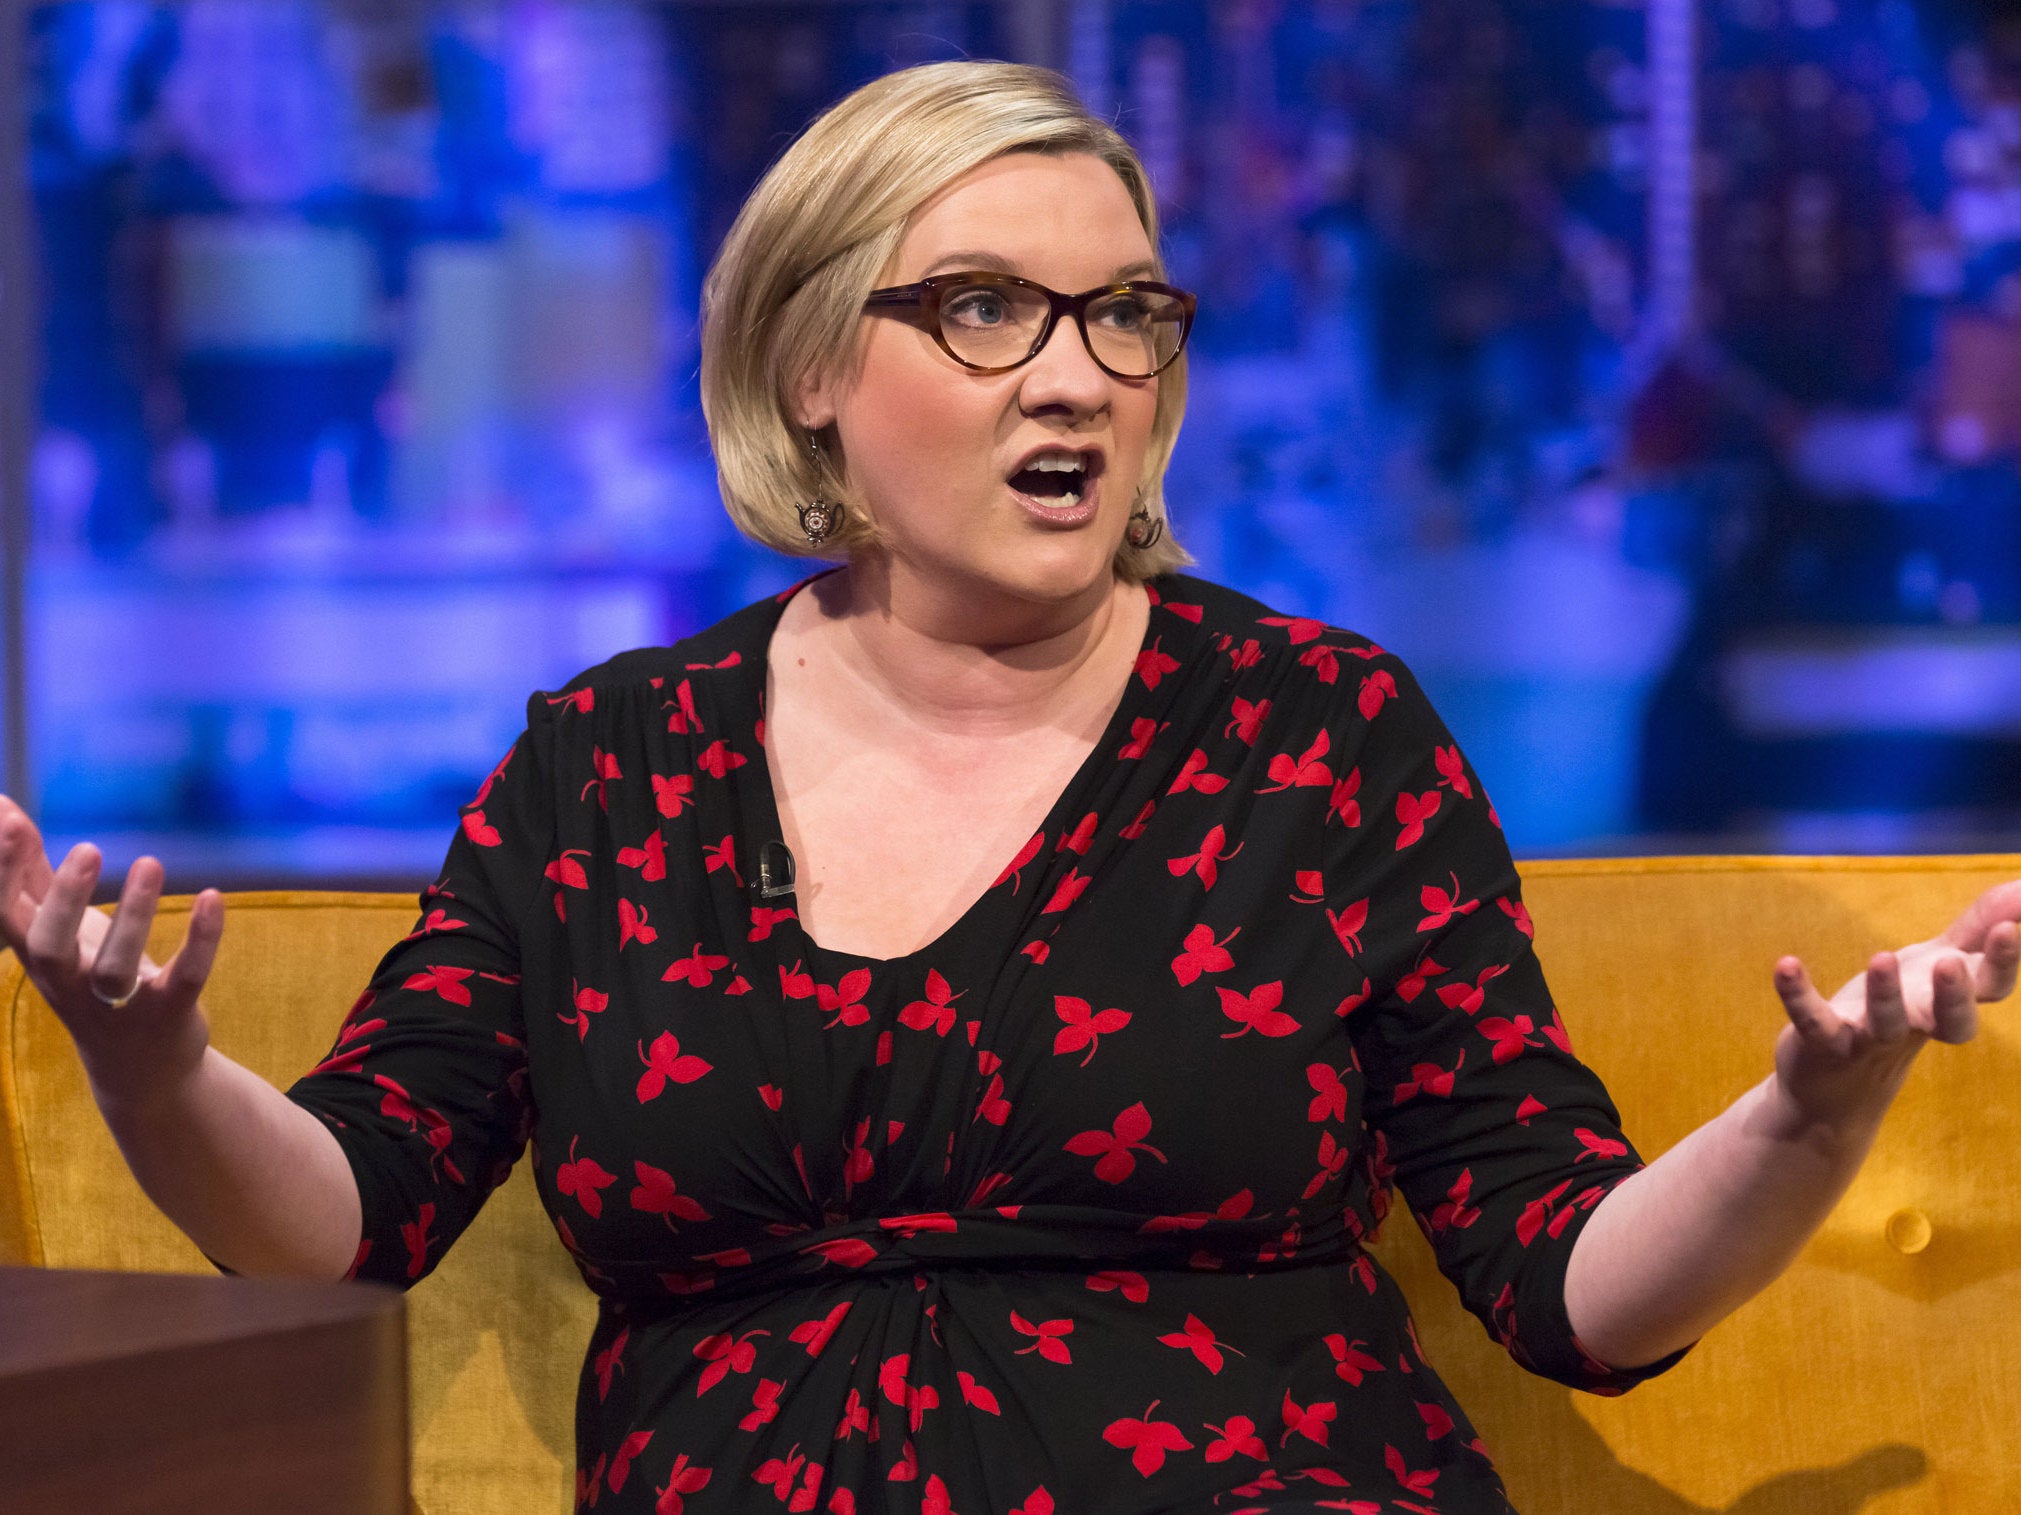 Sarah Millican is a comedian and 'not a model' as she points out in a self-penned response to critics